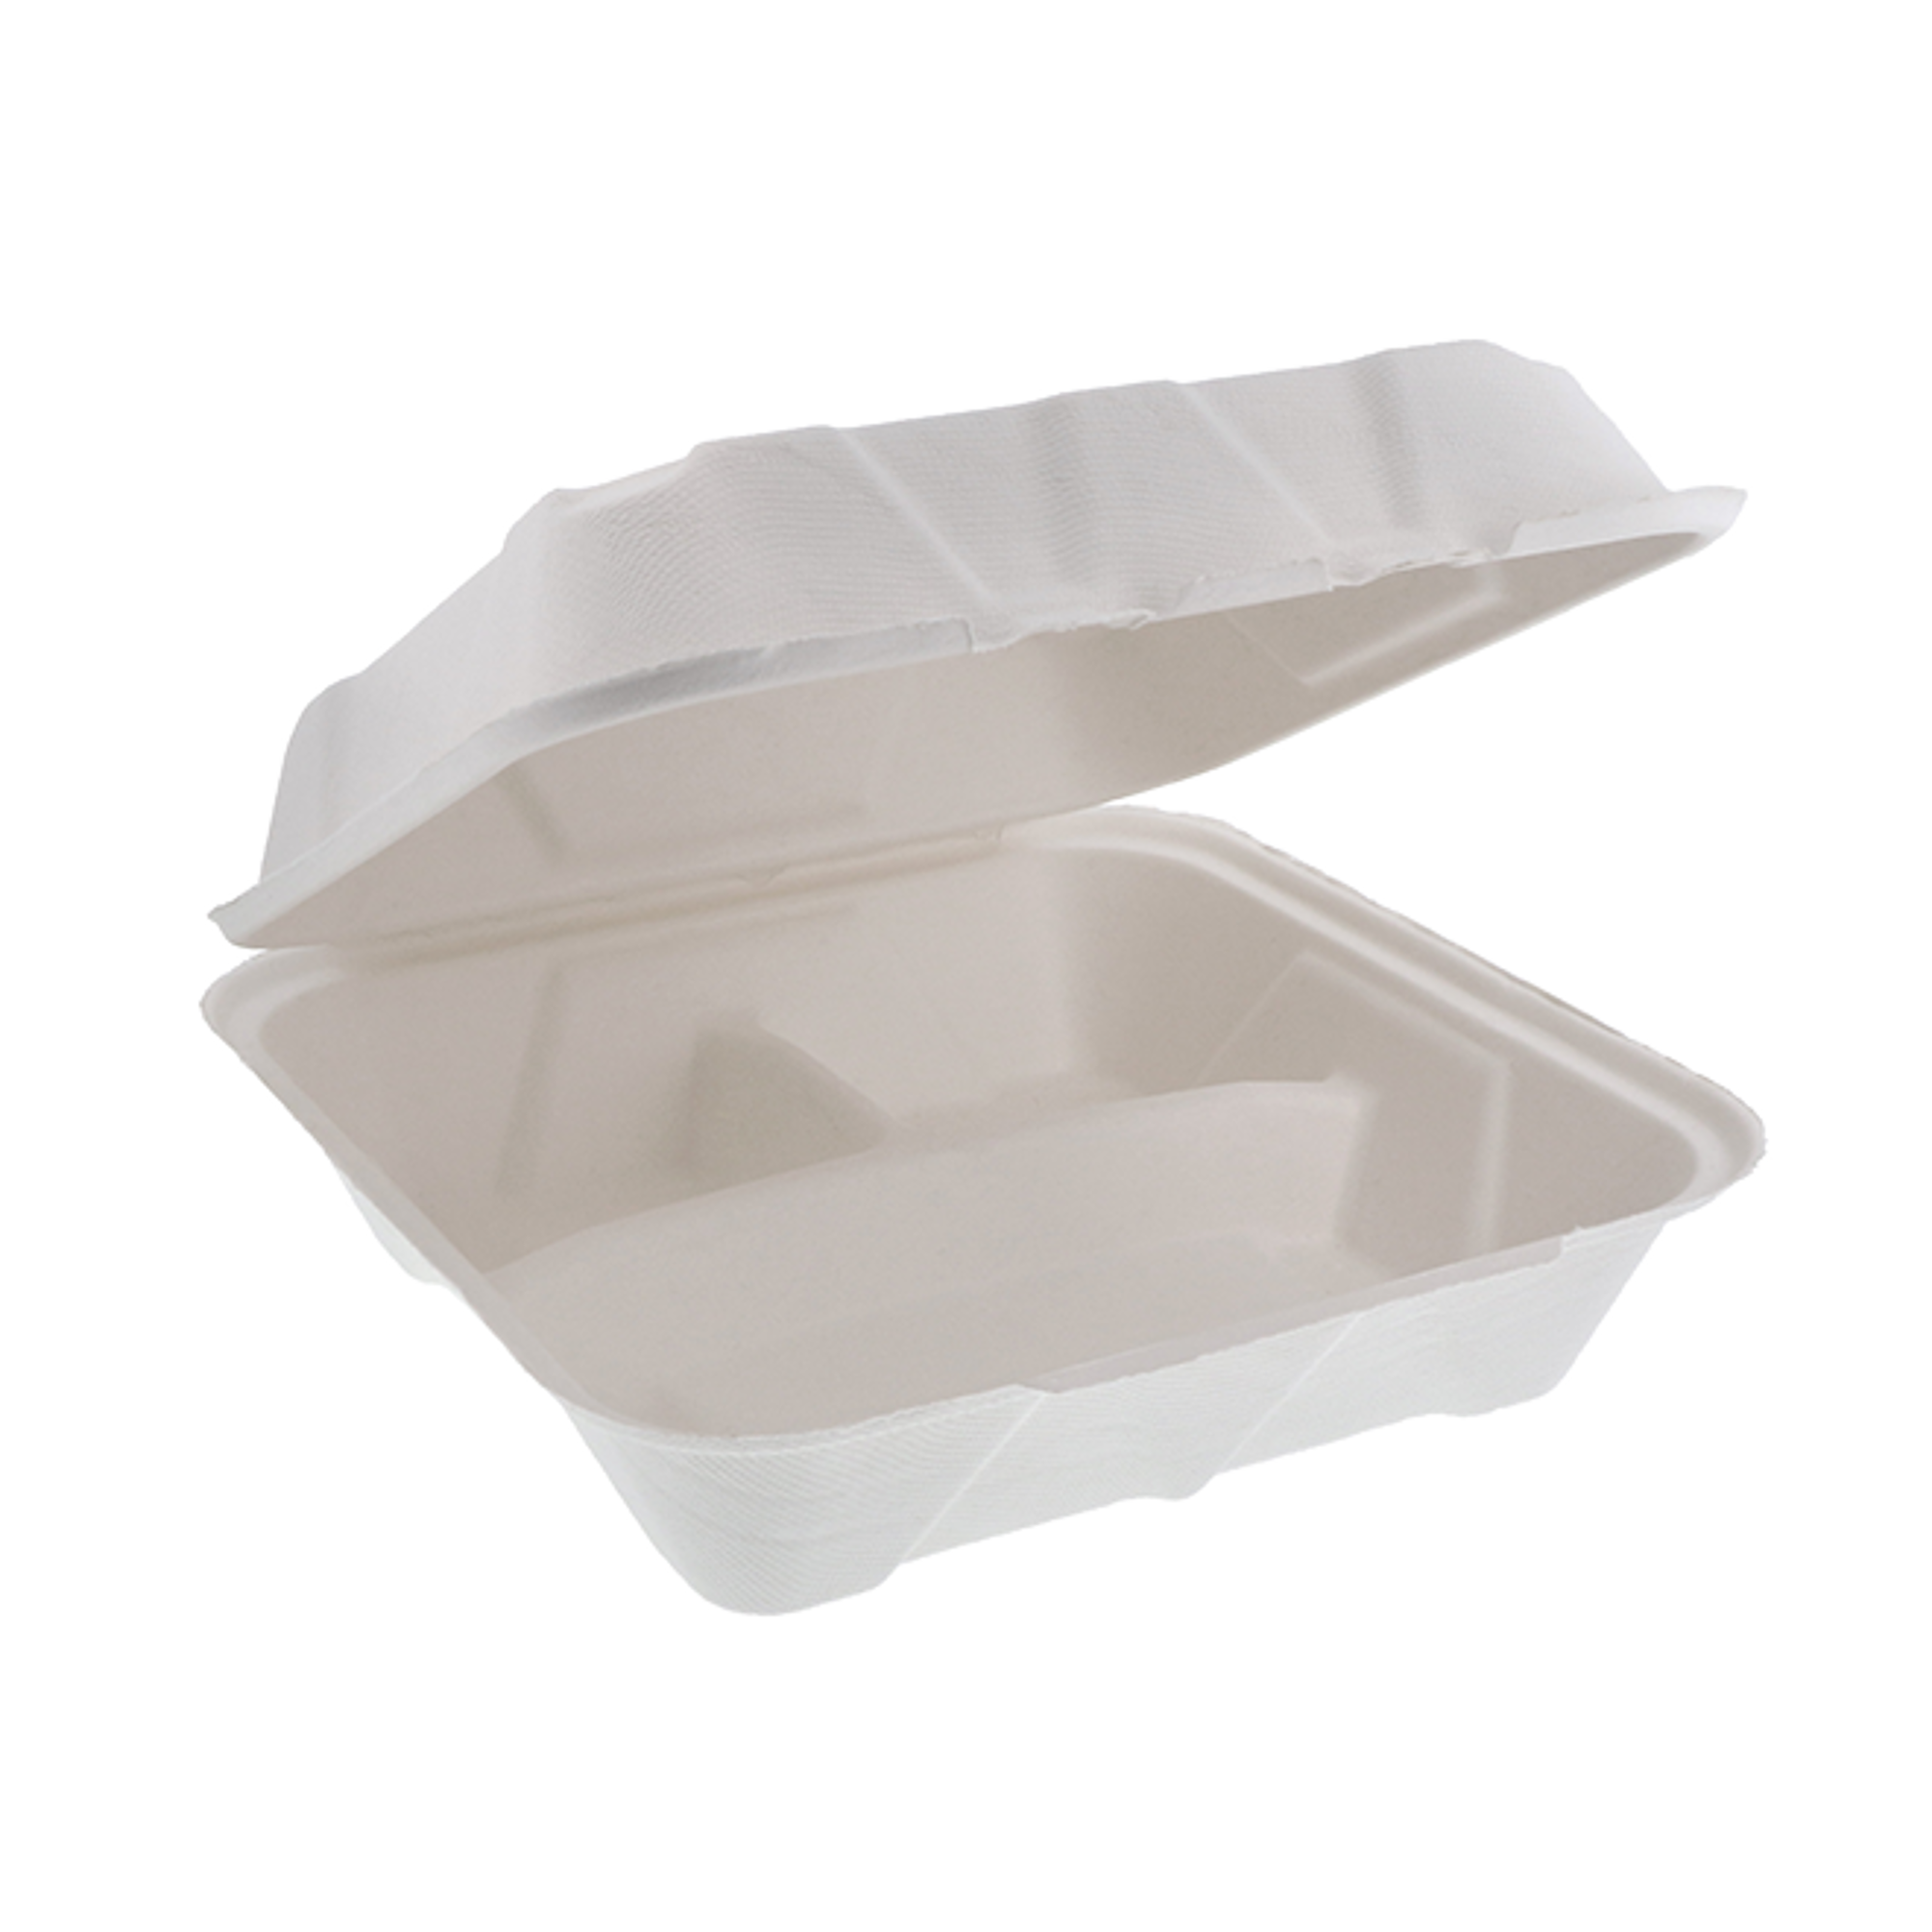 Hefty Earthchoice 3-Compartment Hinged Lid Containers, 9 (50 ct.) – Openbax